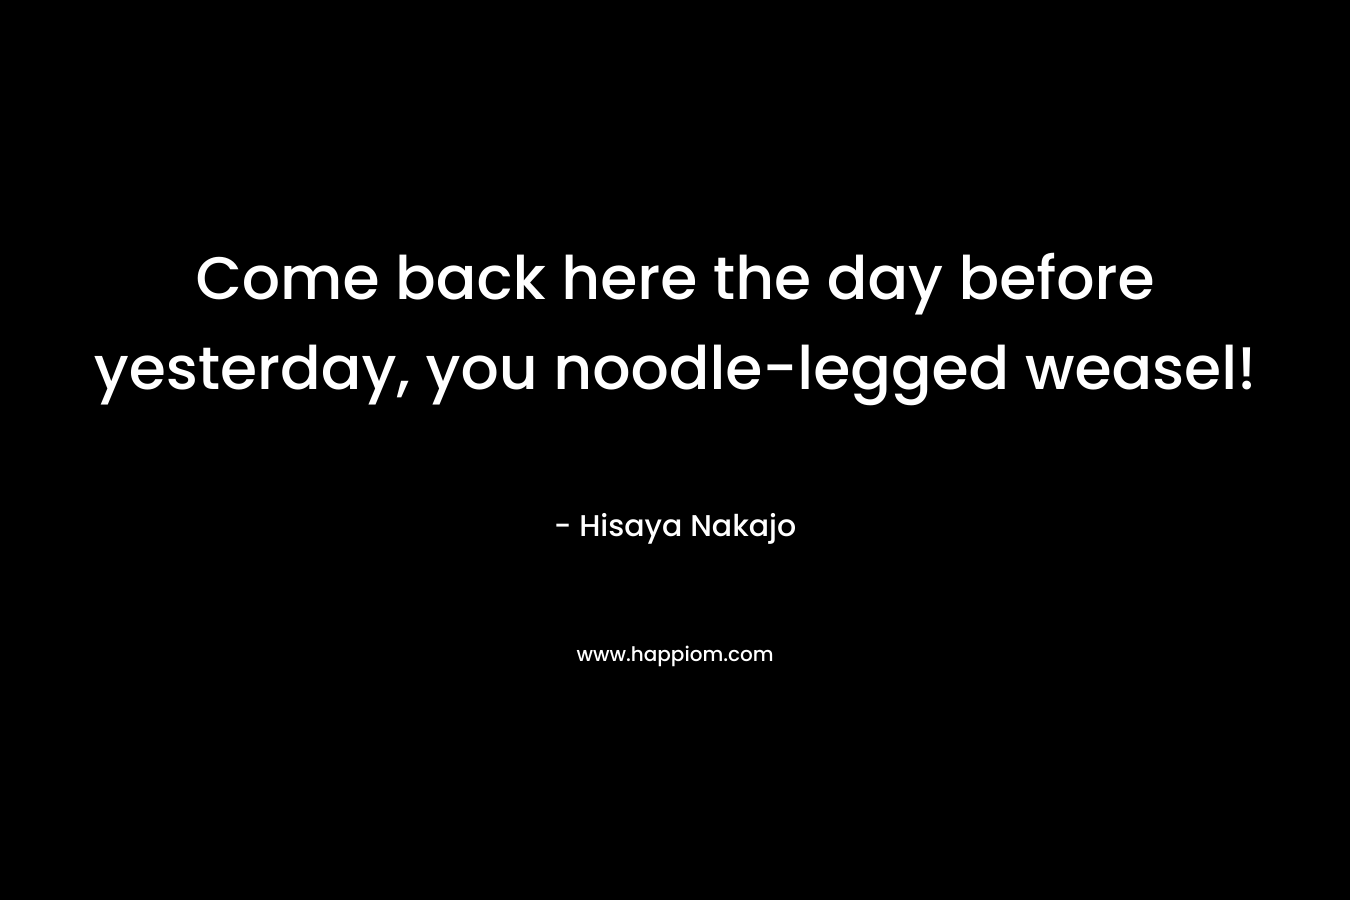 Come back here the day before yesterday, you noodle-legged weasel! – Hisaya Nakajo